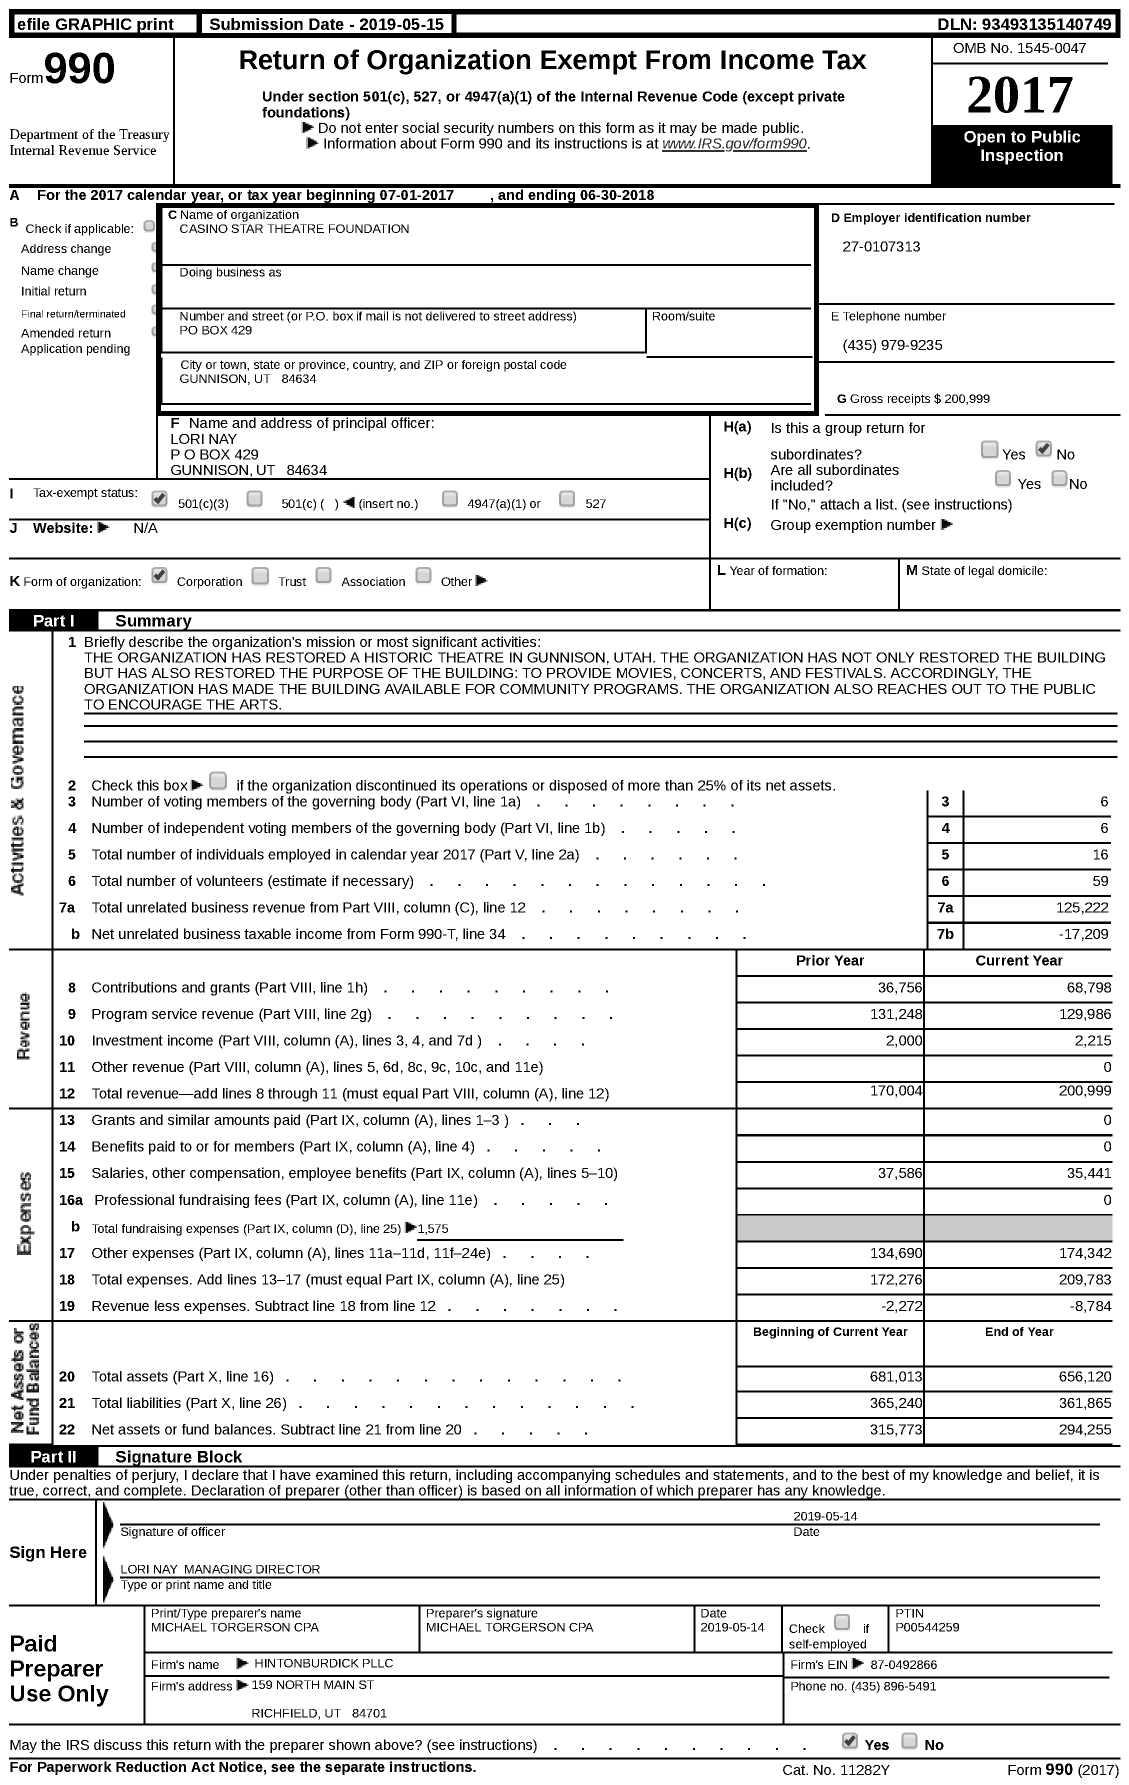 Image of first page of 2017 Form 990 for The Casino Star Theater Foundation